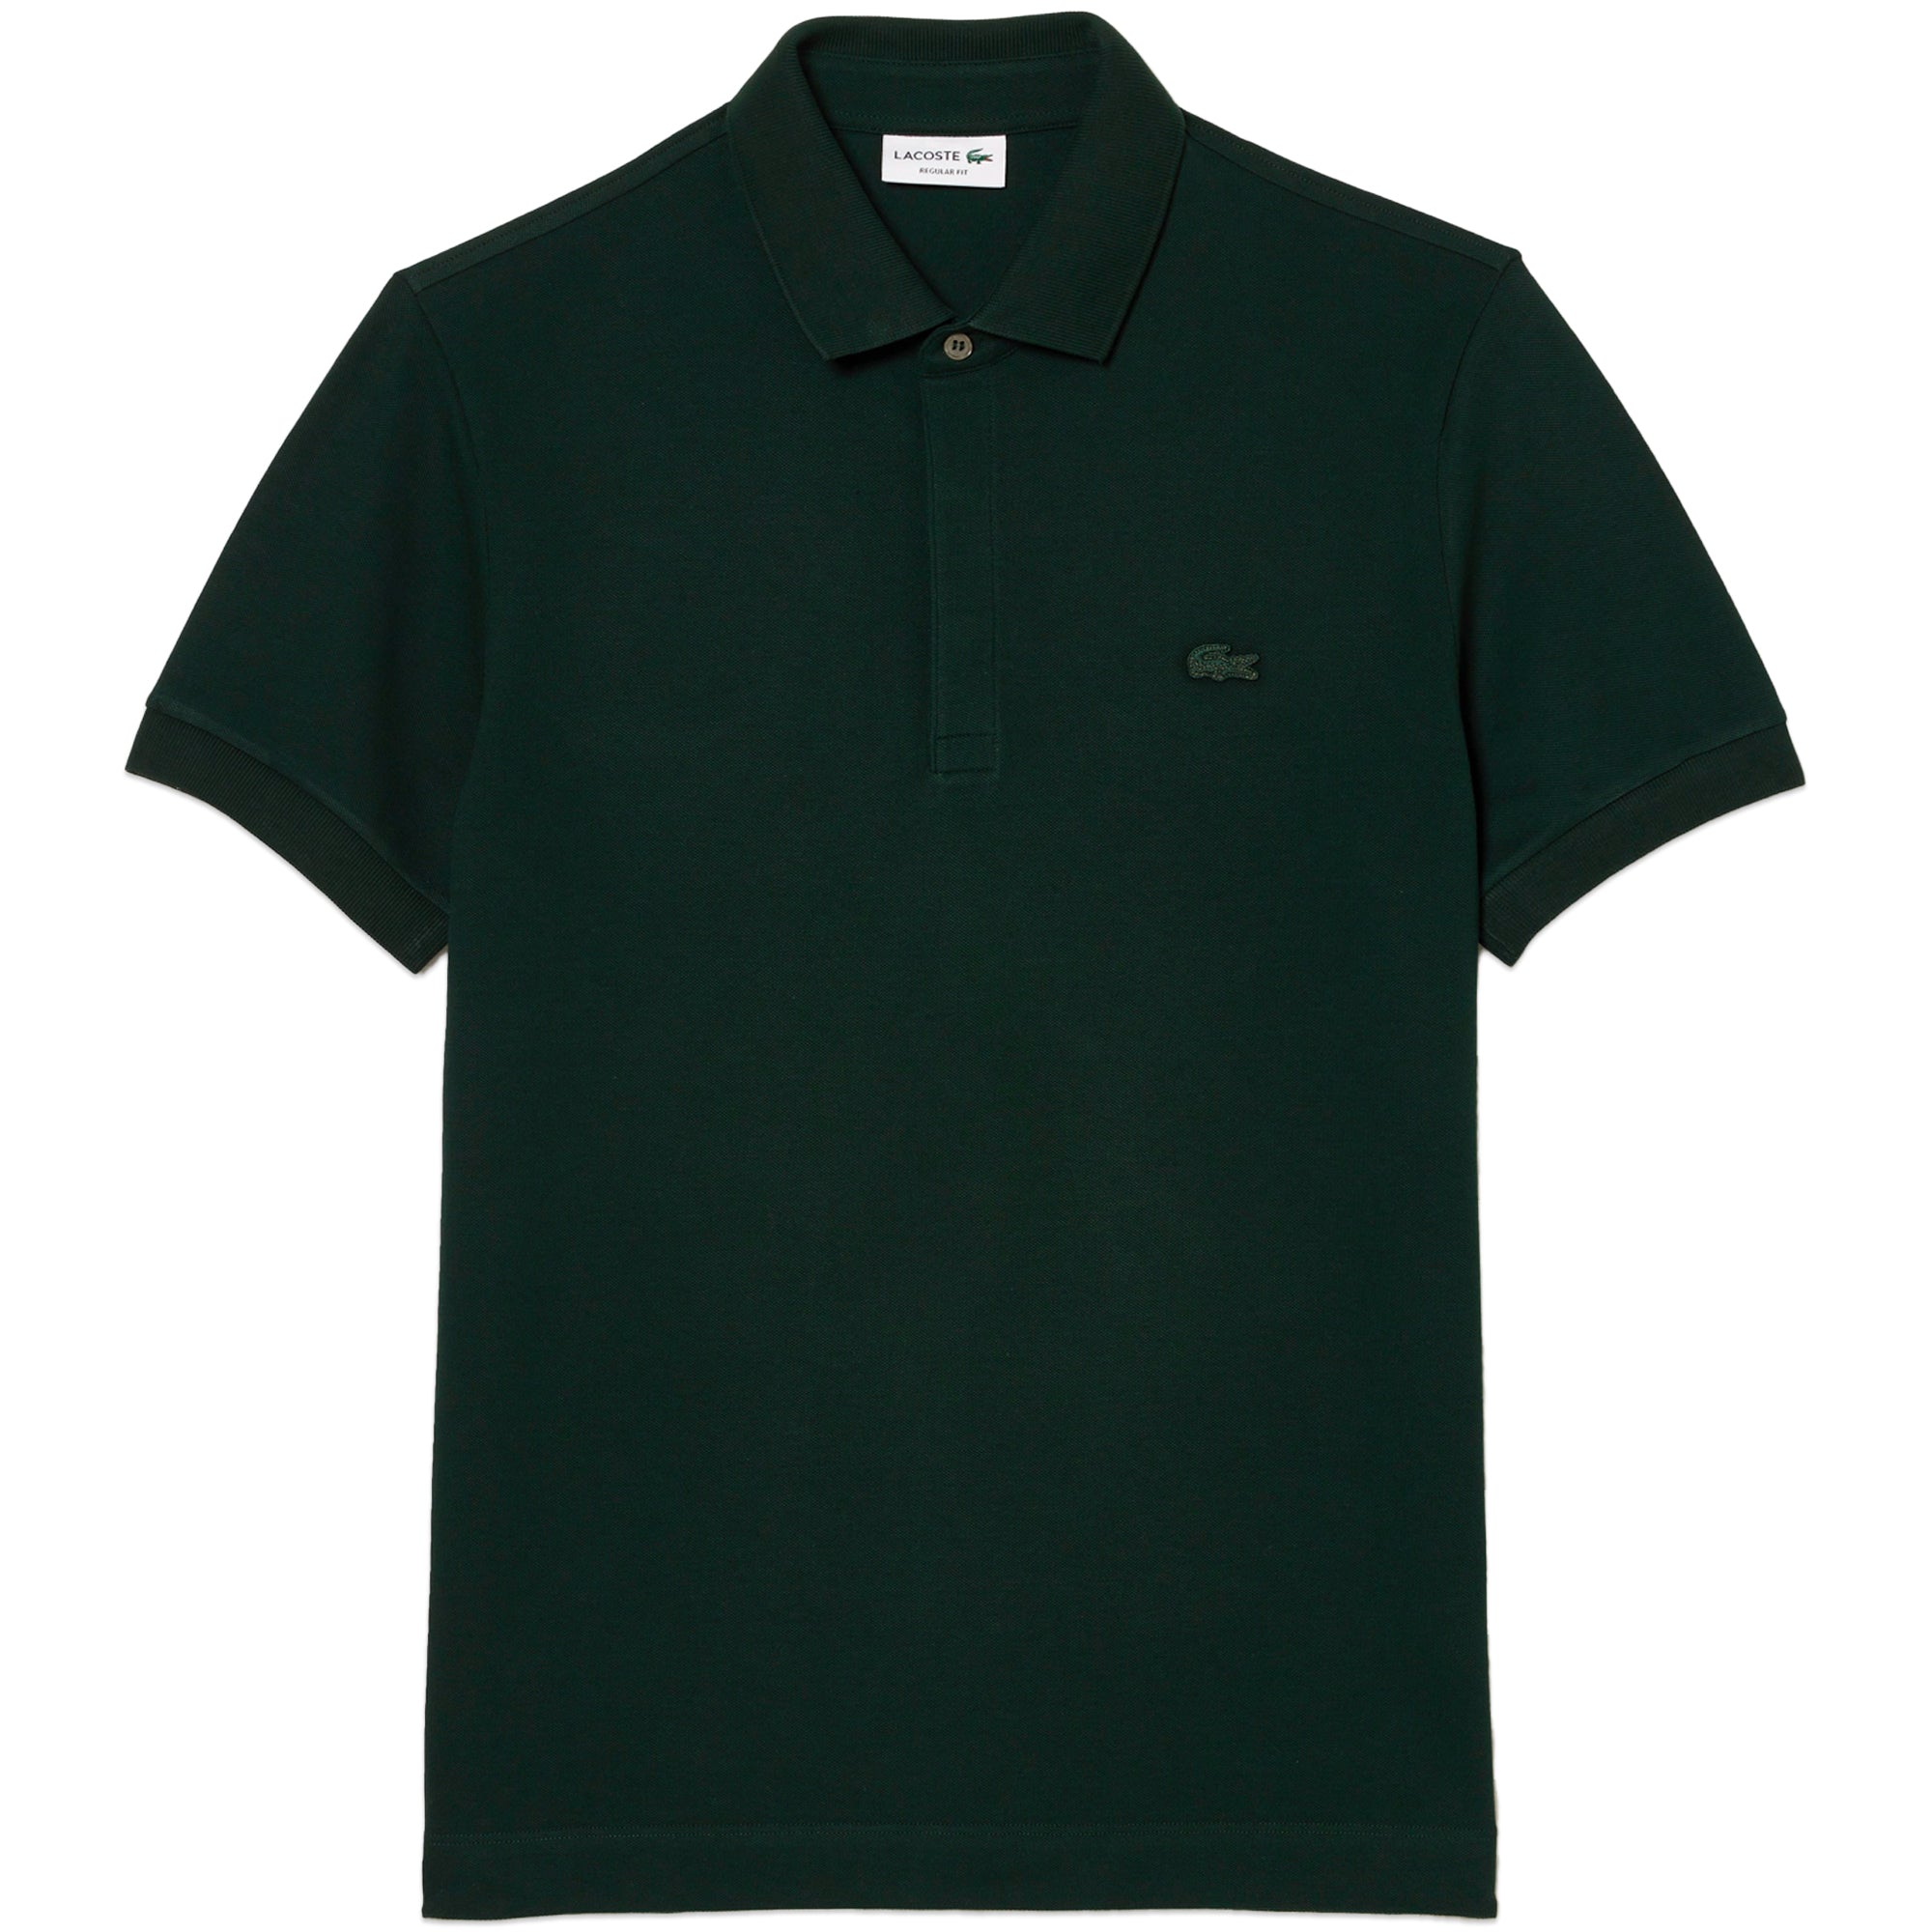 Lacoste Paris Regular Fit Stretch Polo PH5522 - Sinople Green